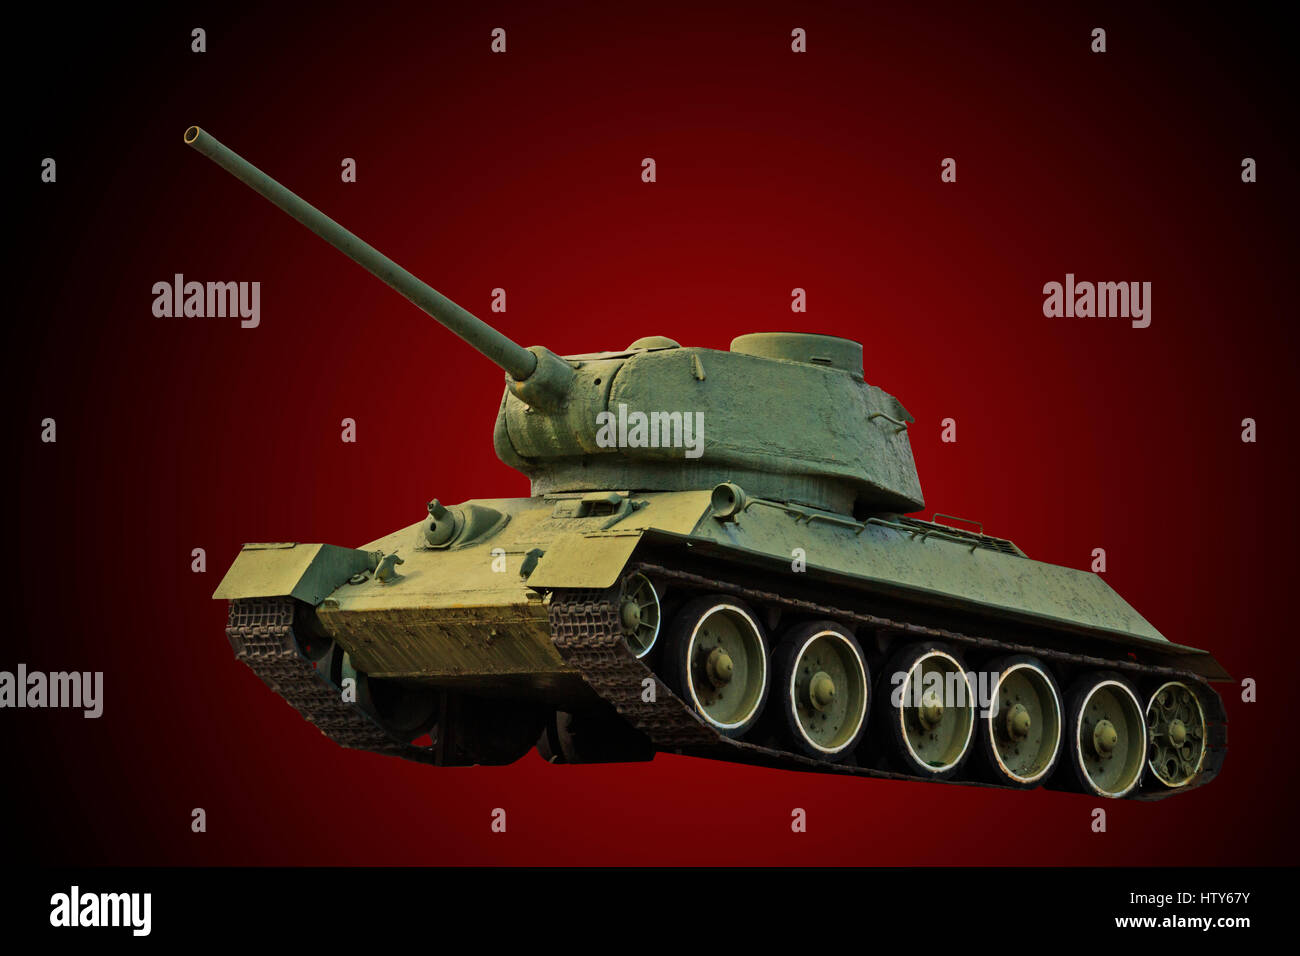 real military tank on a red background,war, heavy equipment, gun, second world war, the Soviet Union, T-34, armor, May 9, Victory Day Stock Photo